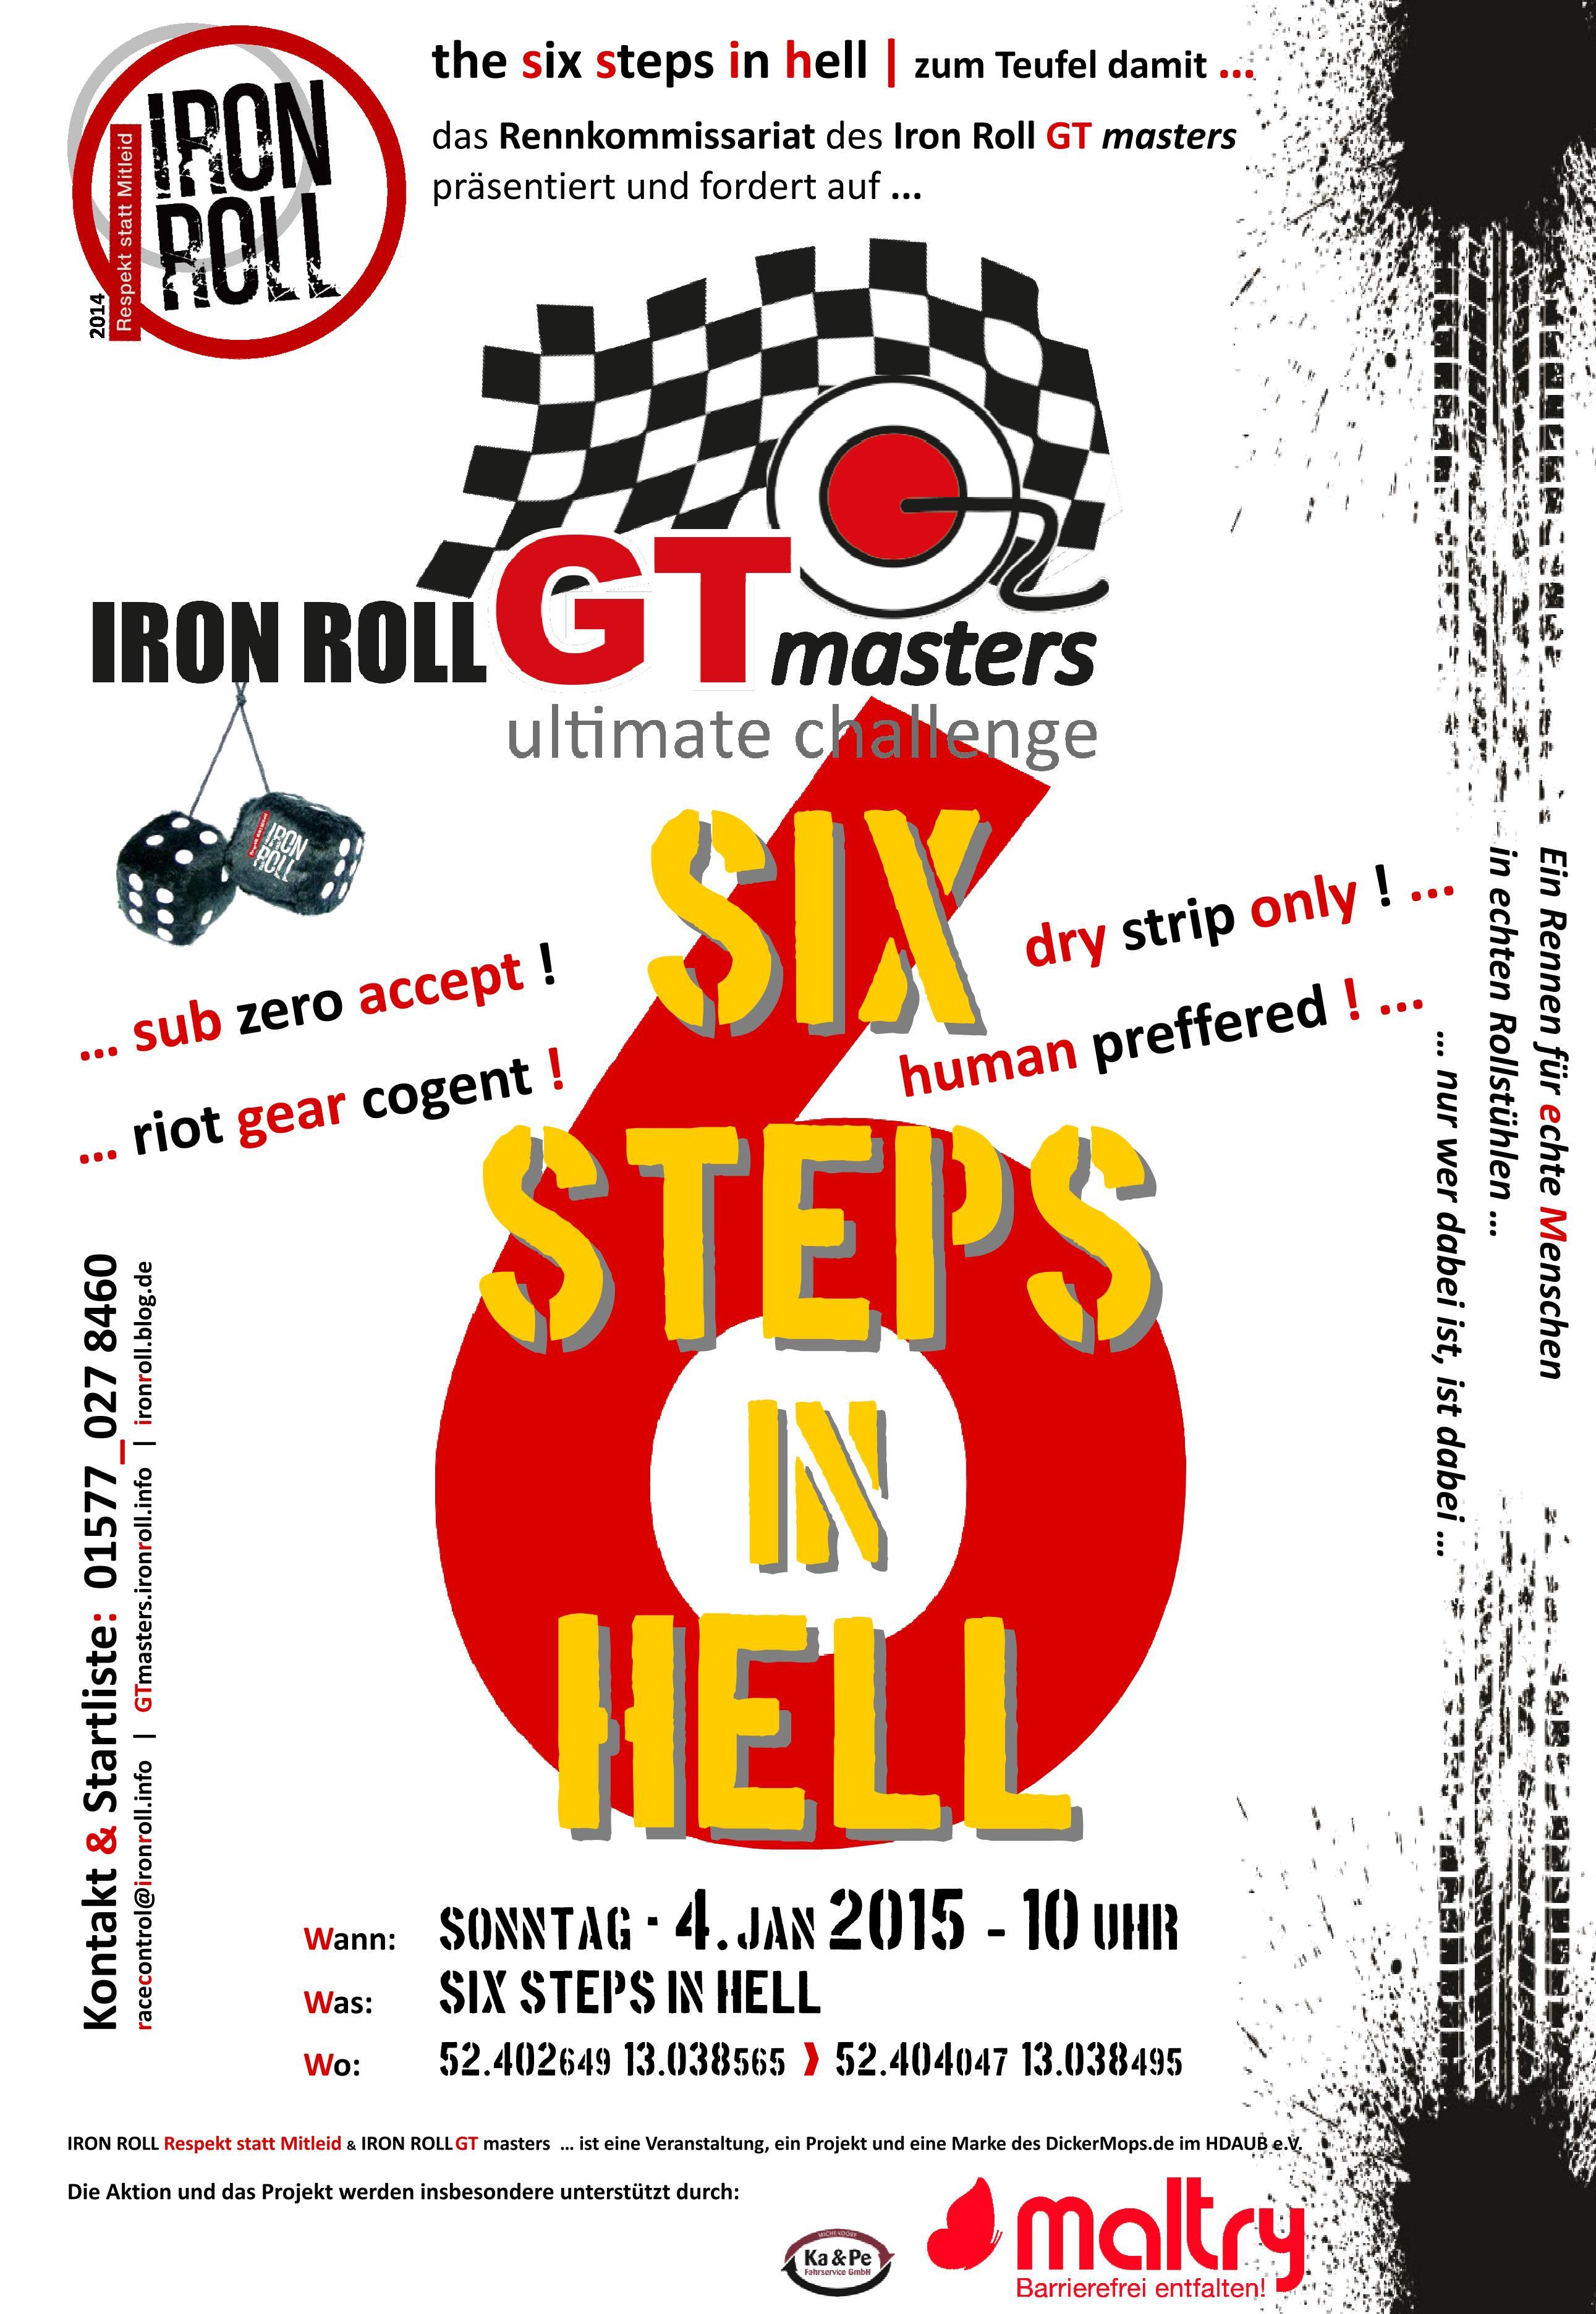 Iron Roll GT masters six steps in hell